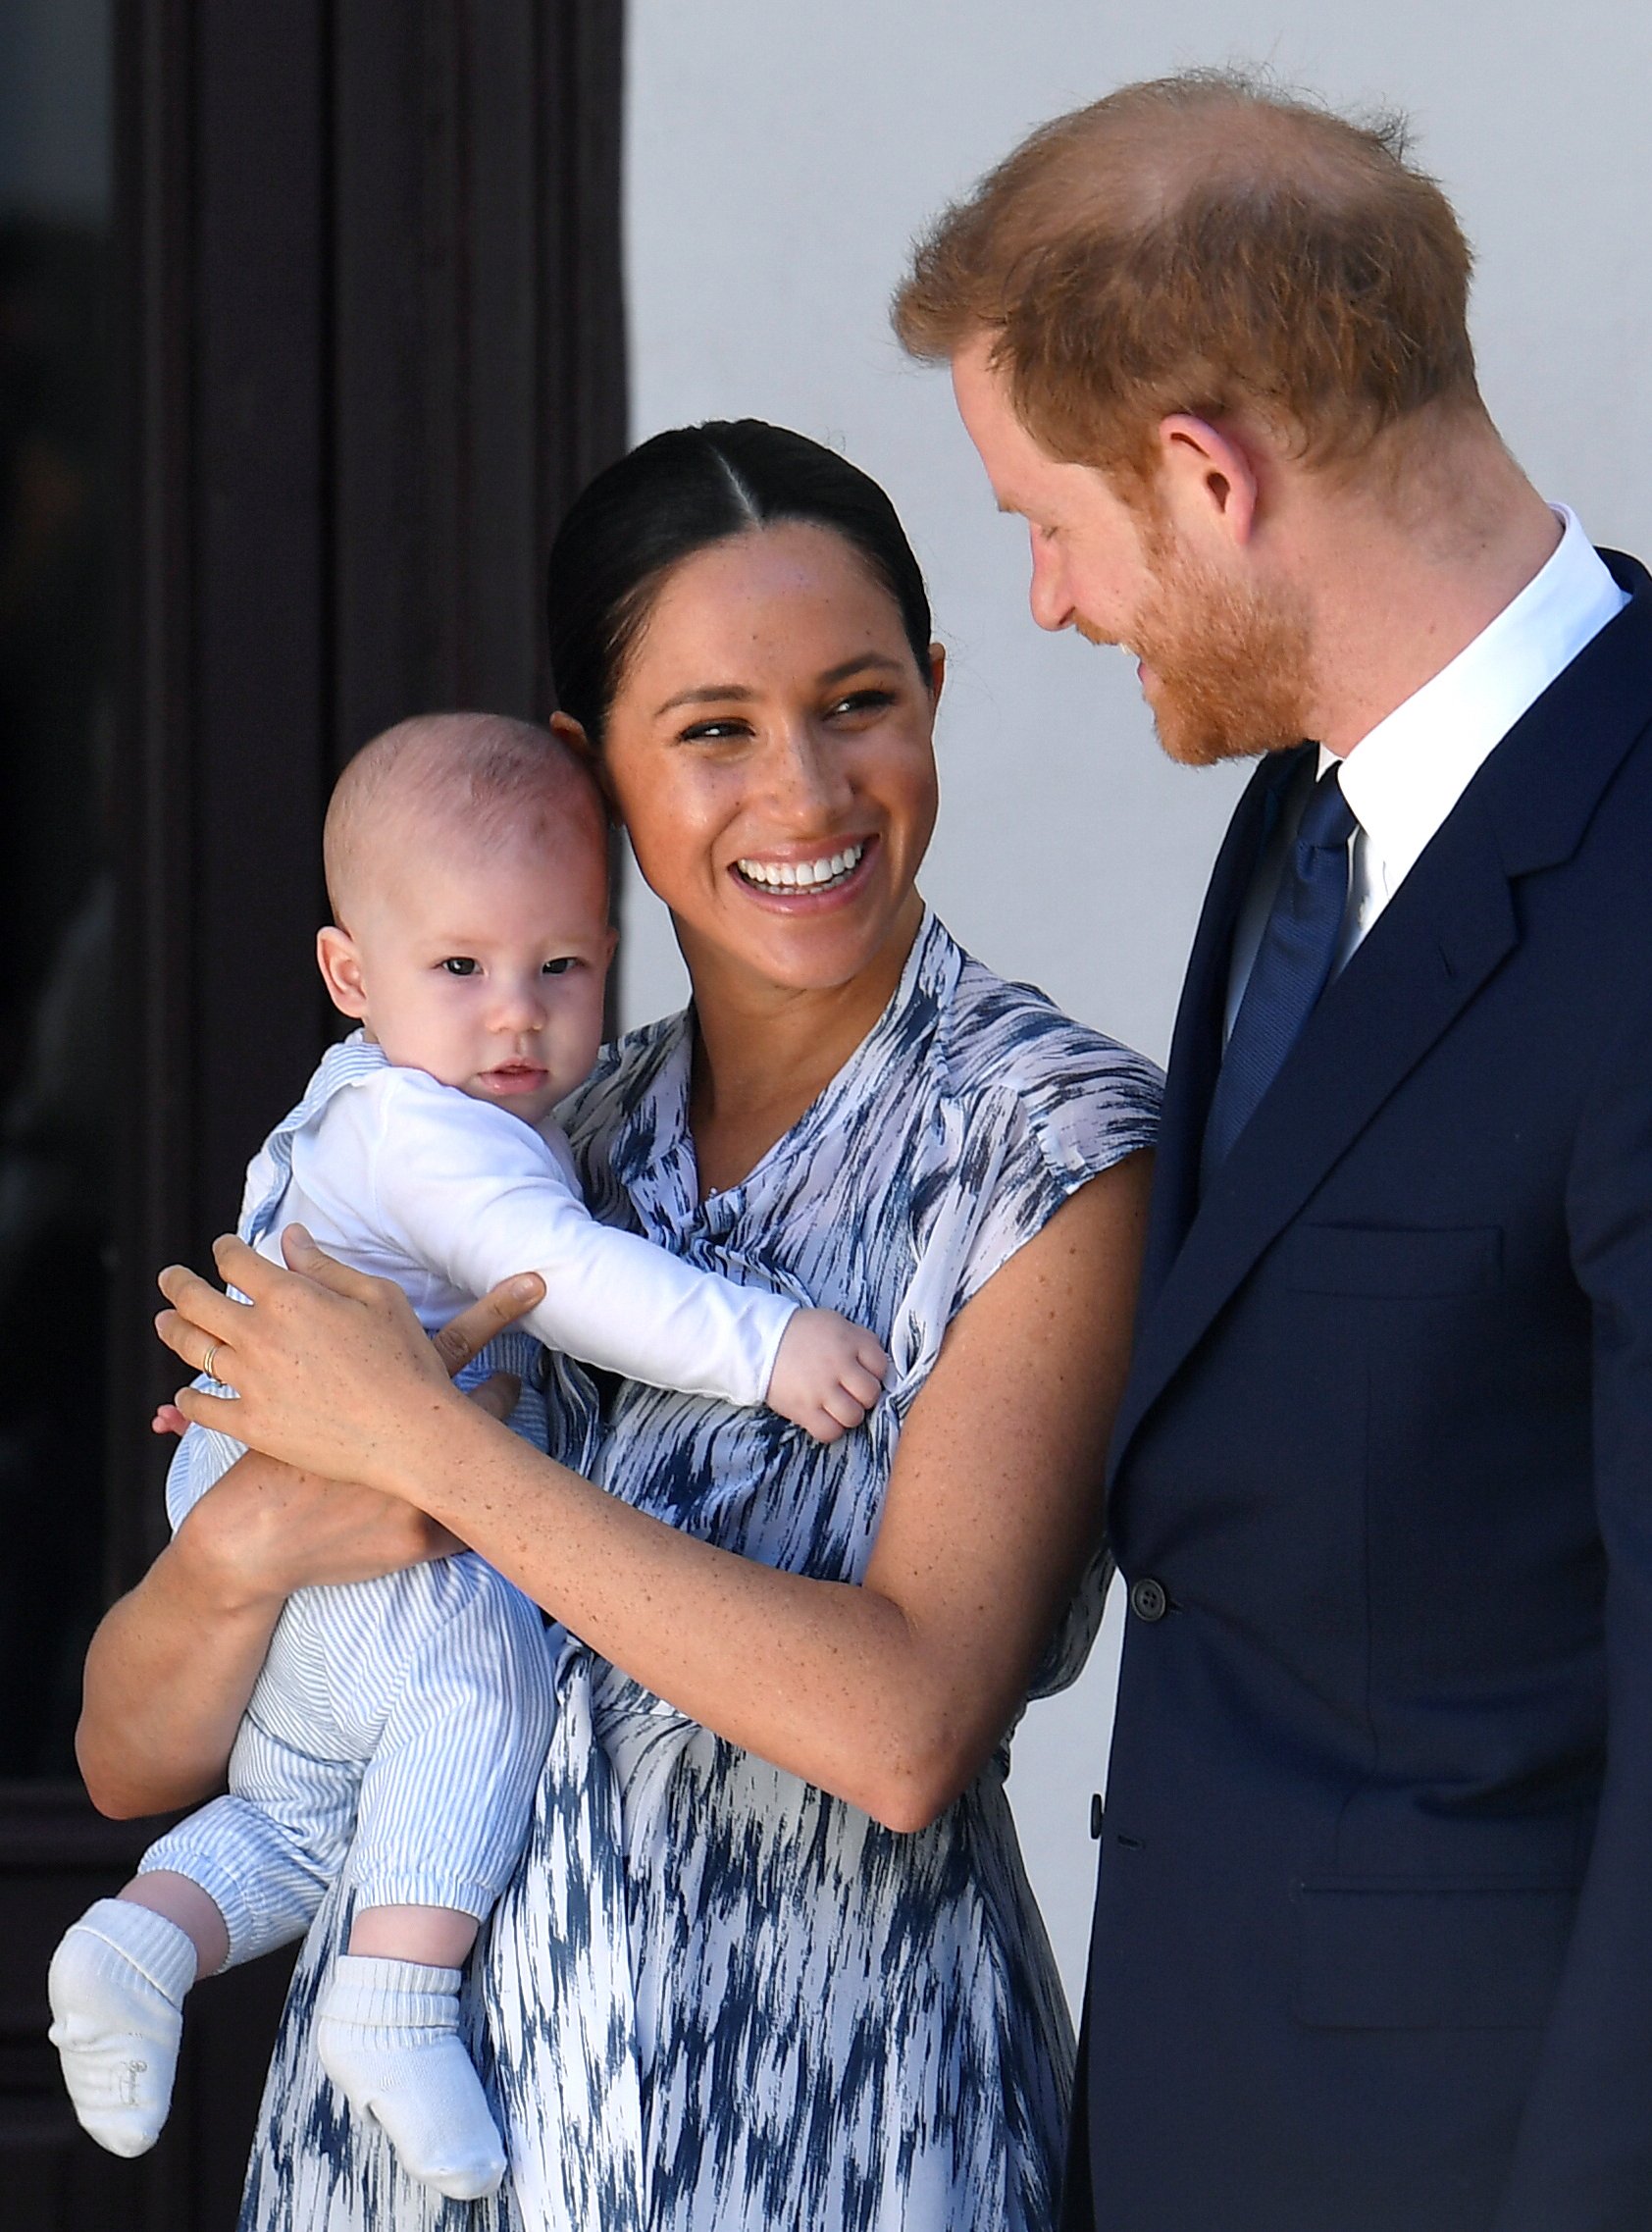 Meghan Markle and Prince Harry with their son Archie in Cape Town, South Africa in 2019. | Source: Getty Images